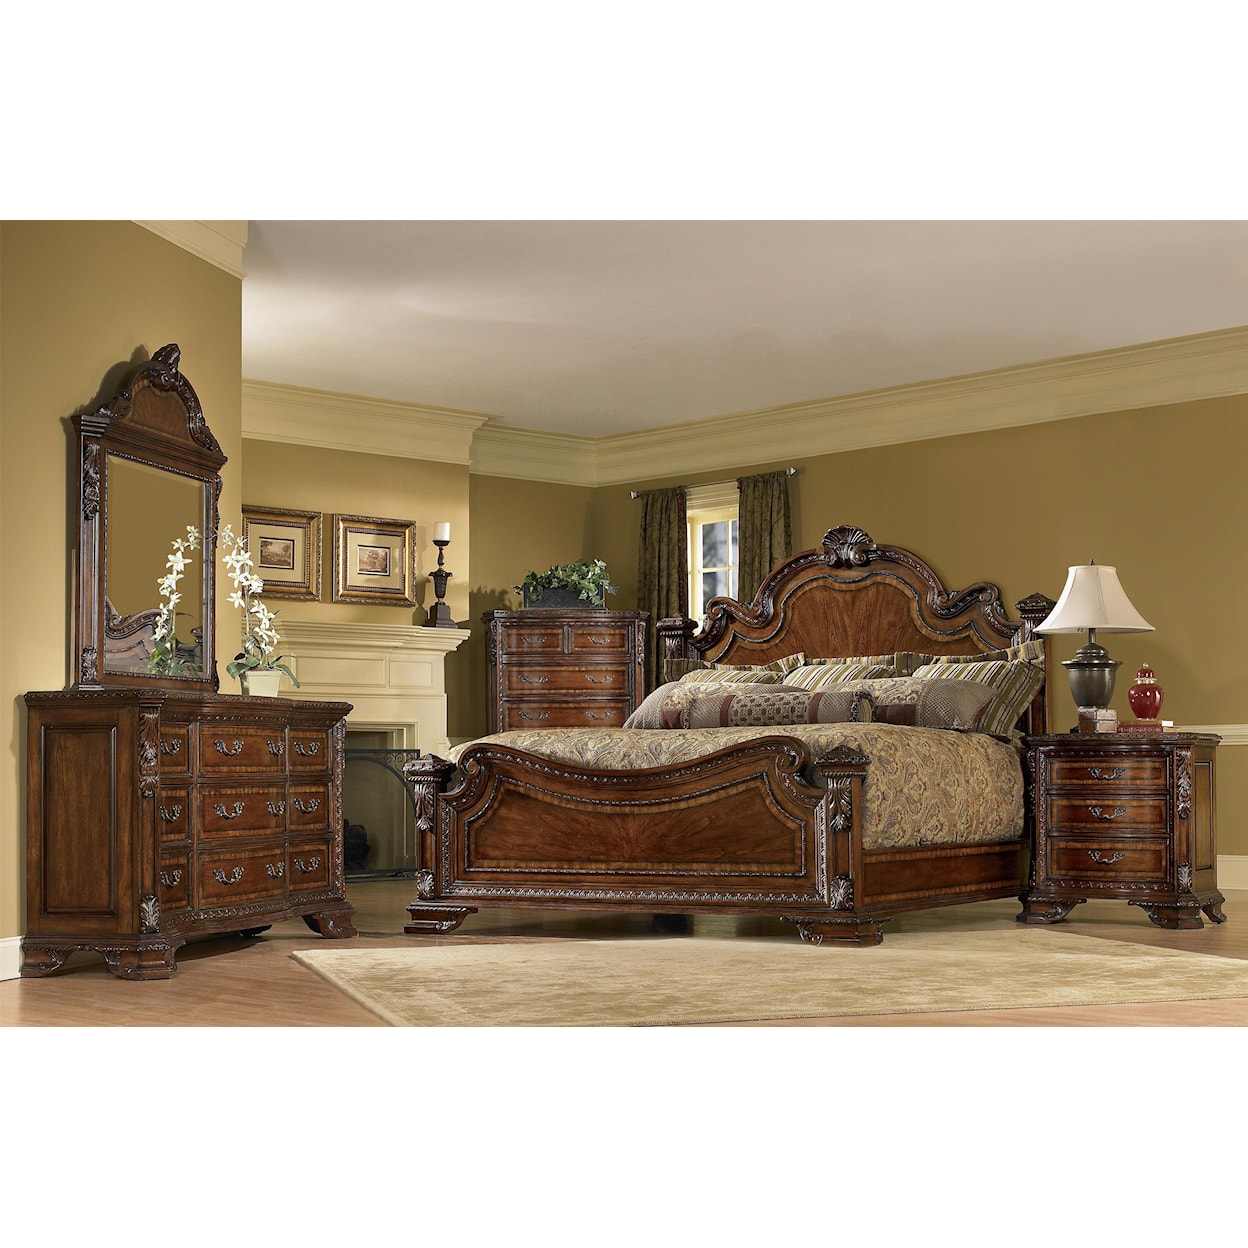 A.R.T. Furniture Inc Annabelle Queen Bedroom Group